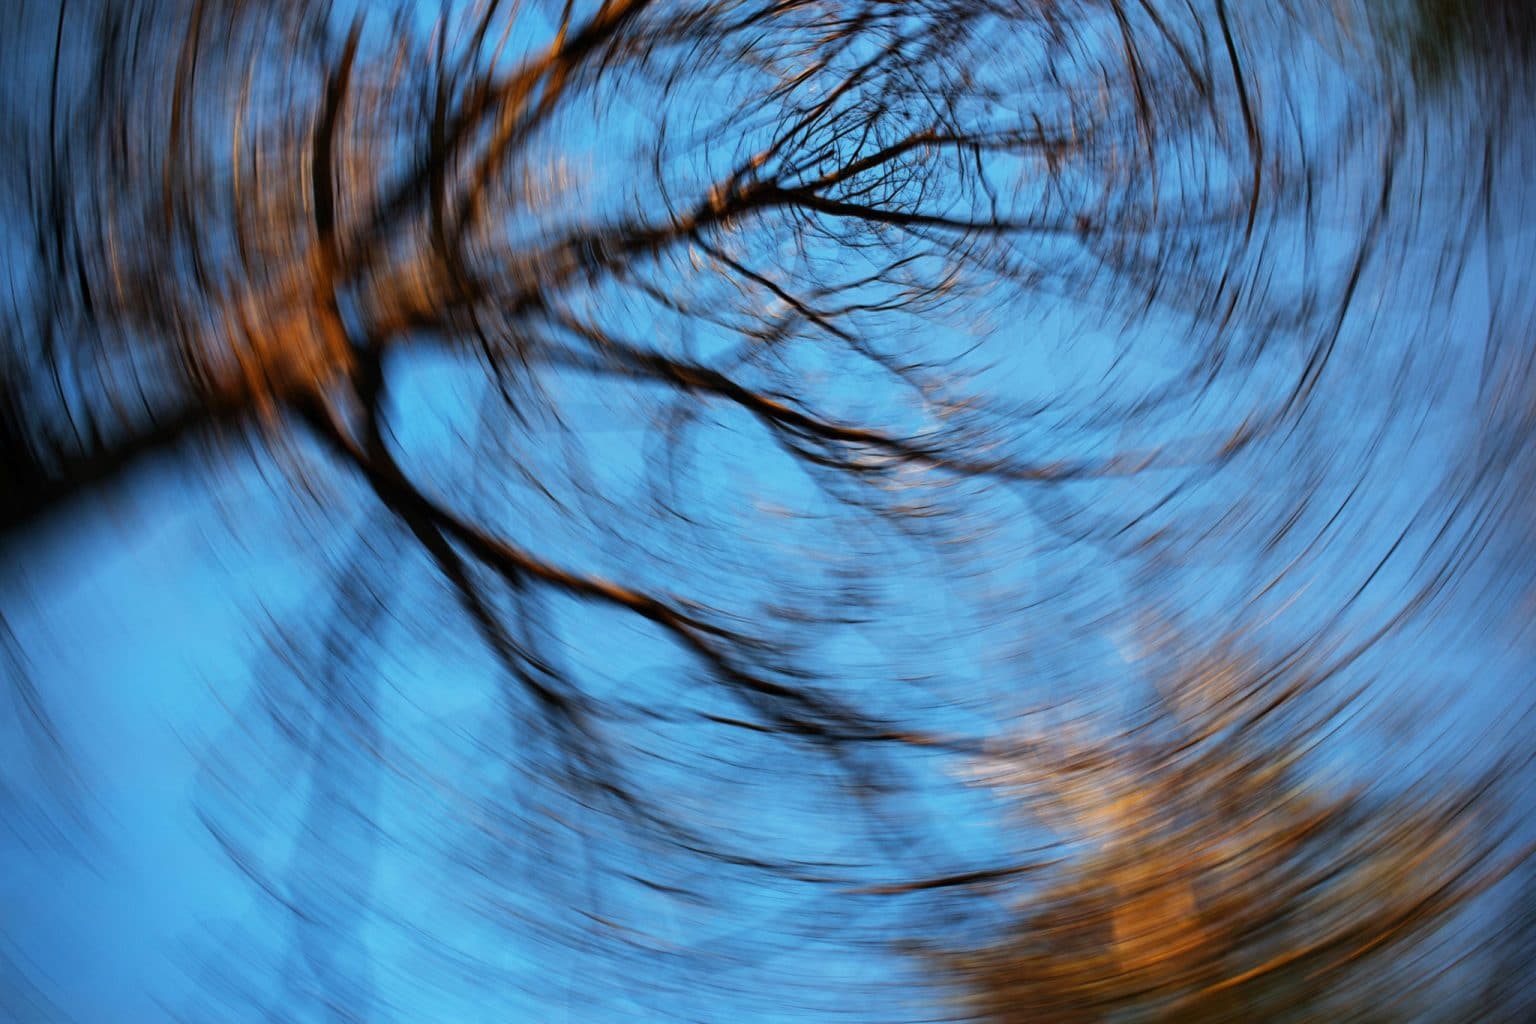 Worm's eye view of a tree swirled in a manner of experiencing vertigo or dizziness.